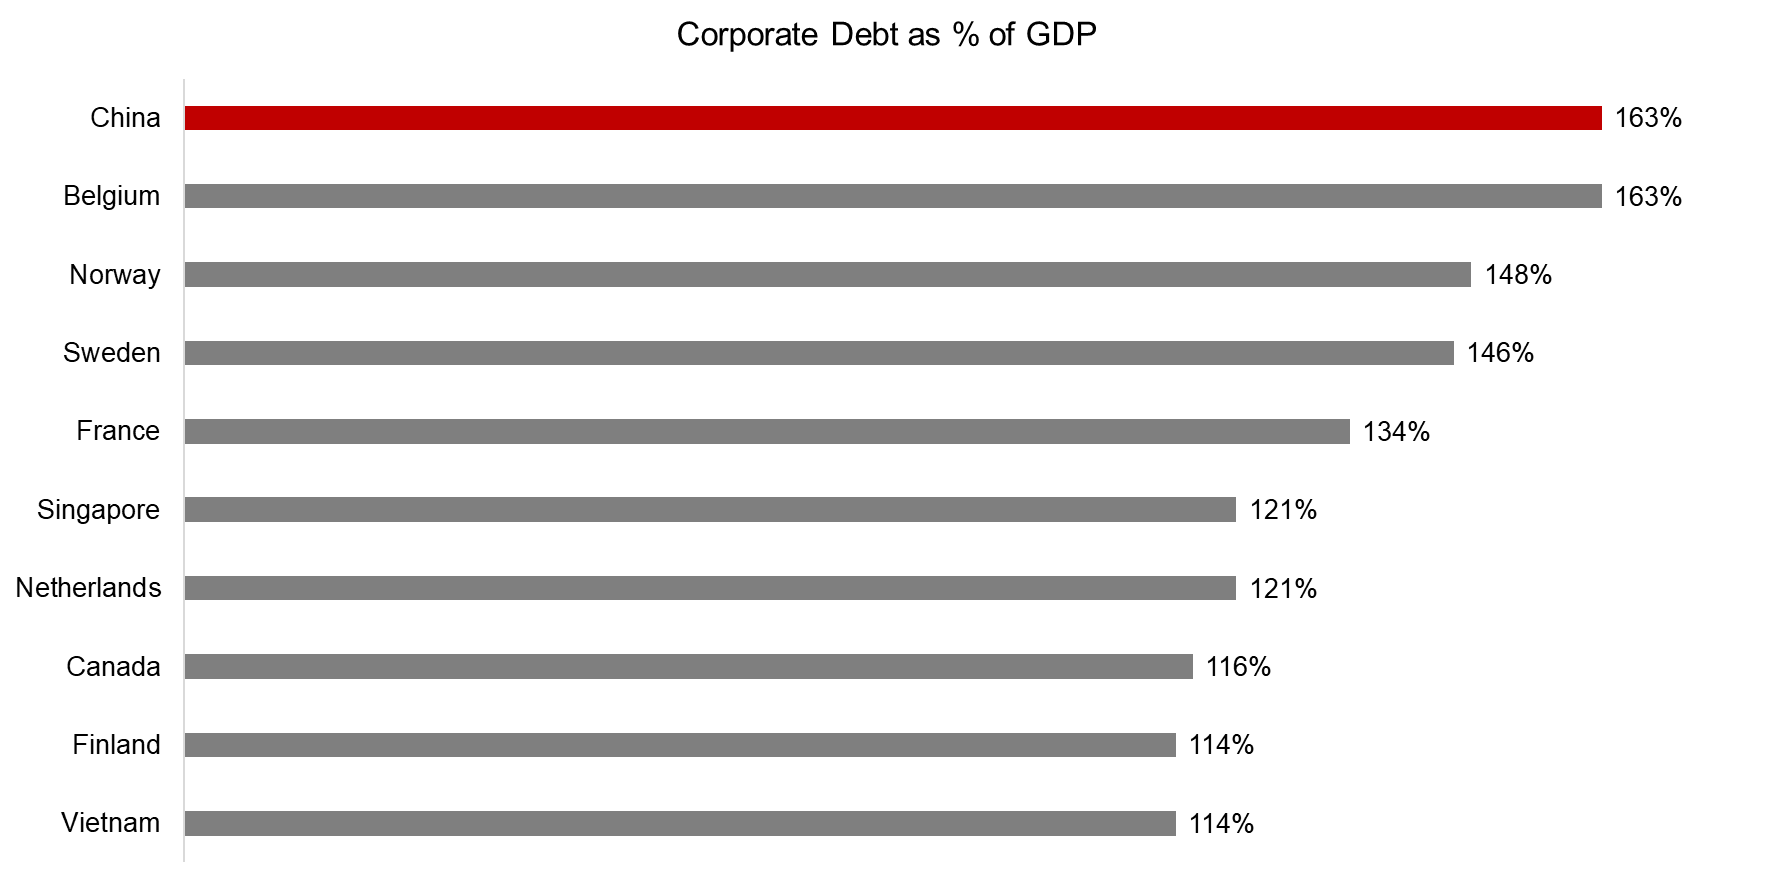 Corporate Debt as % of GDP